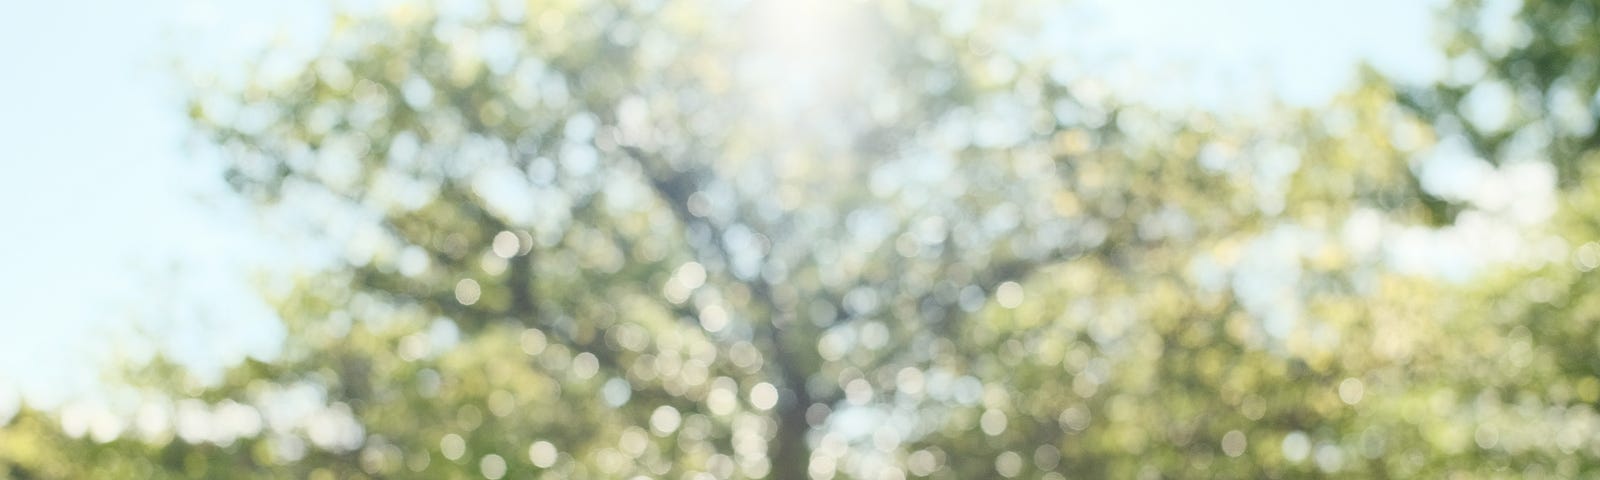 An image of a tree out of focus, to help illustrate how I see this field.